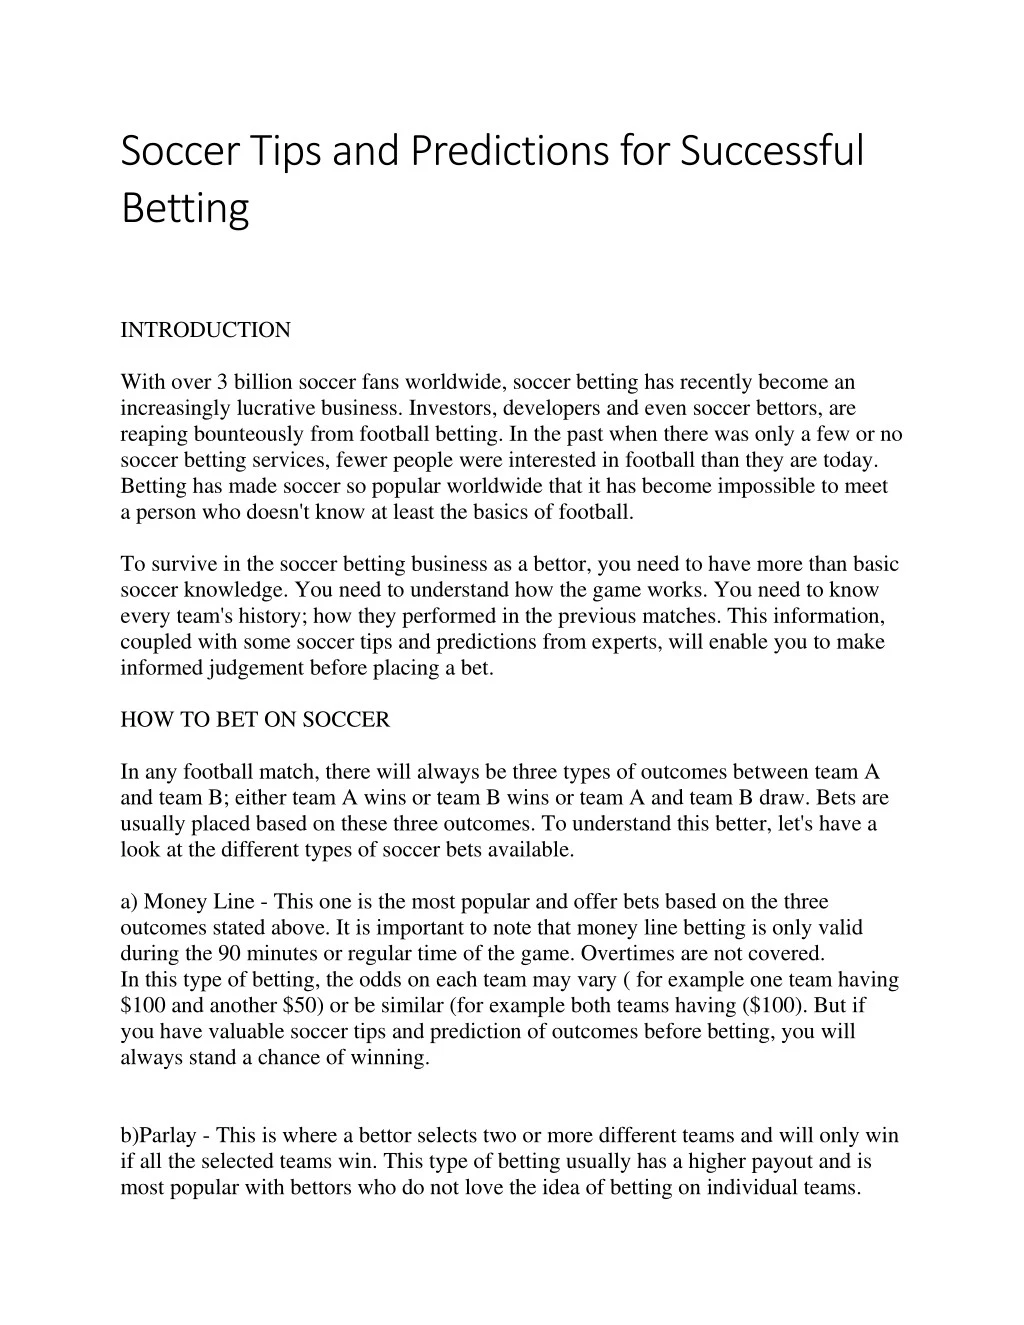 soccer tips and predictions for successful